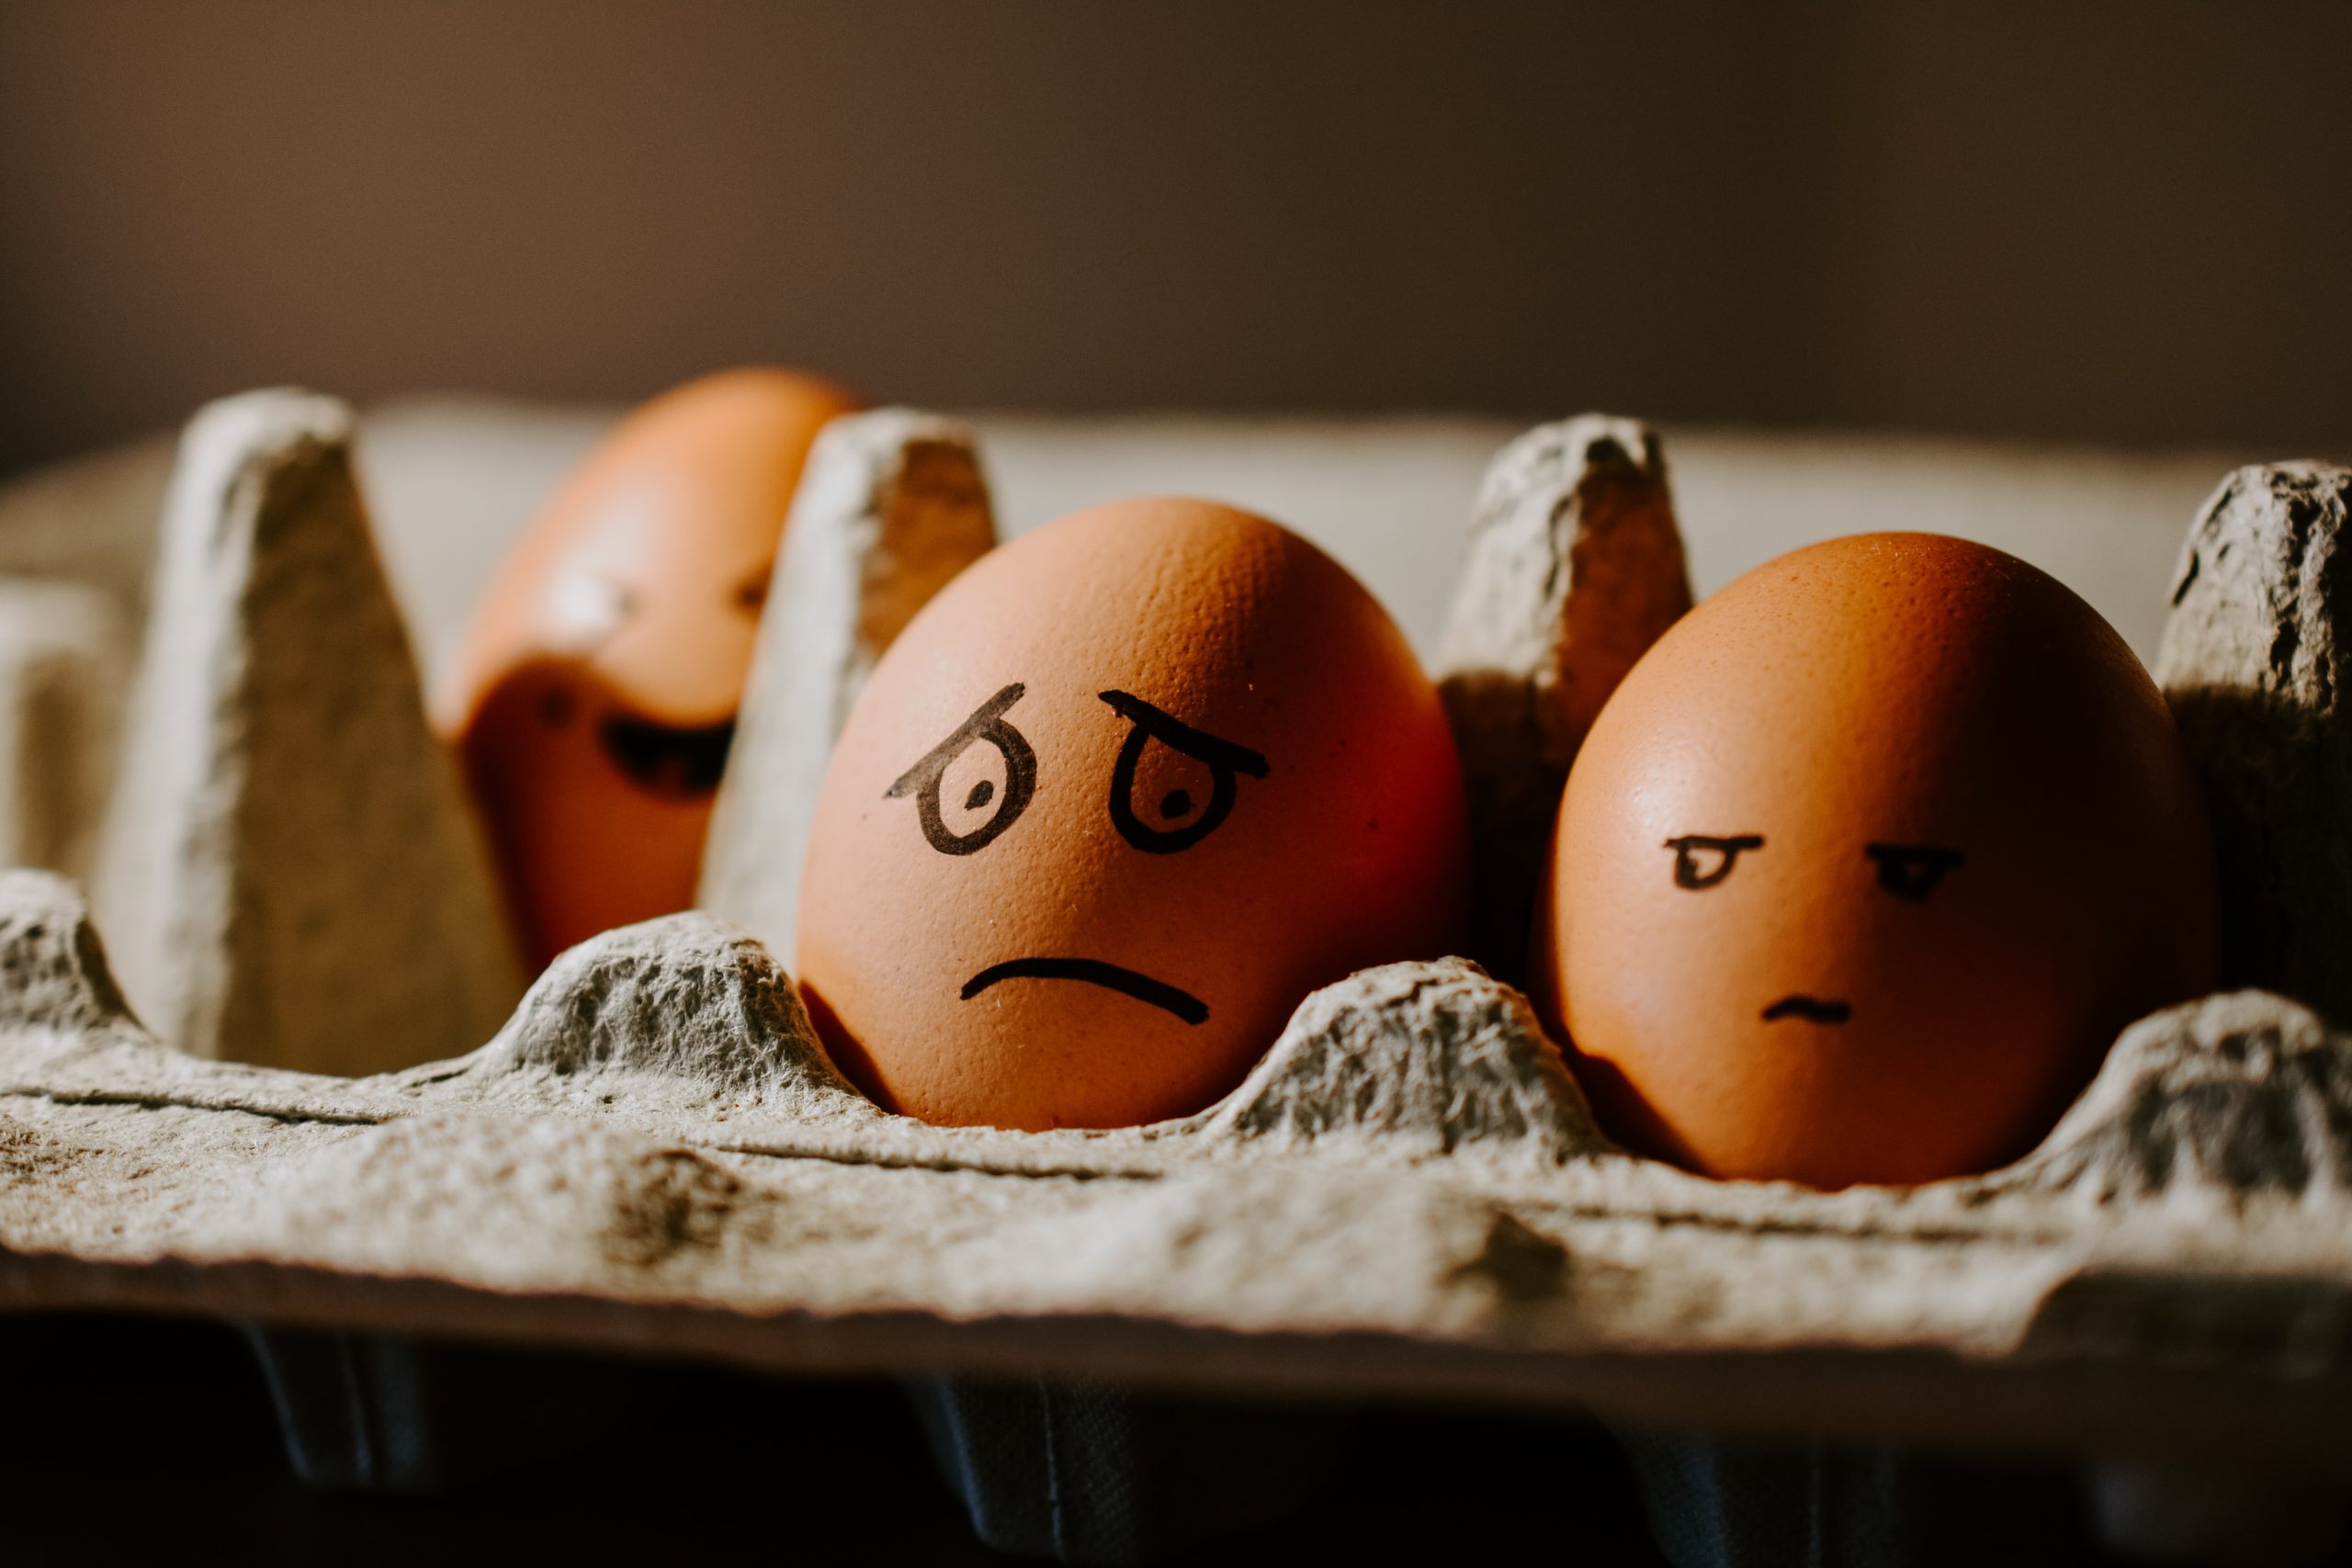 brown eggs in carton with worried faces drawn on with black marker stop worrying